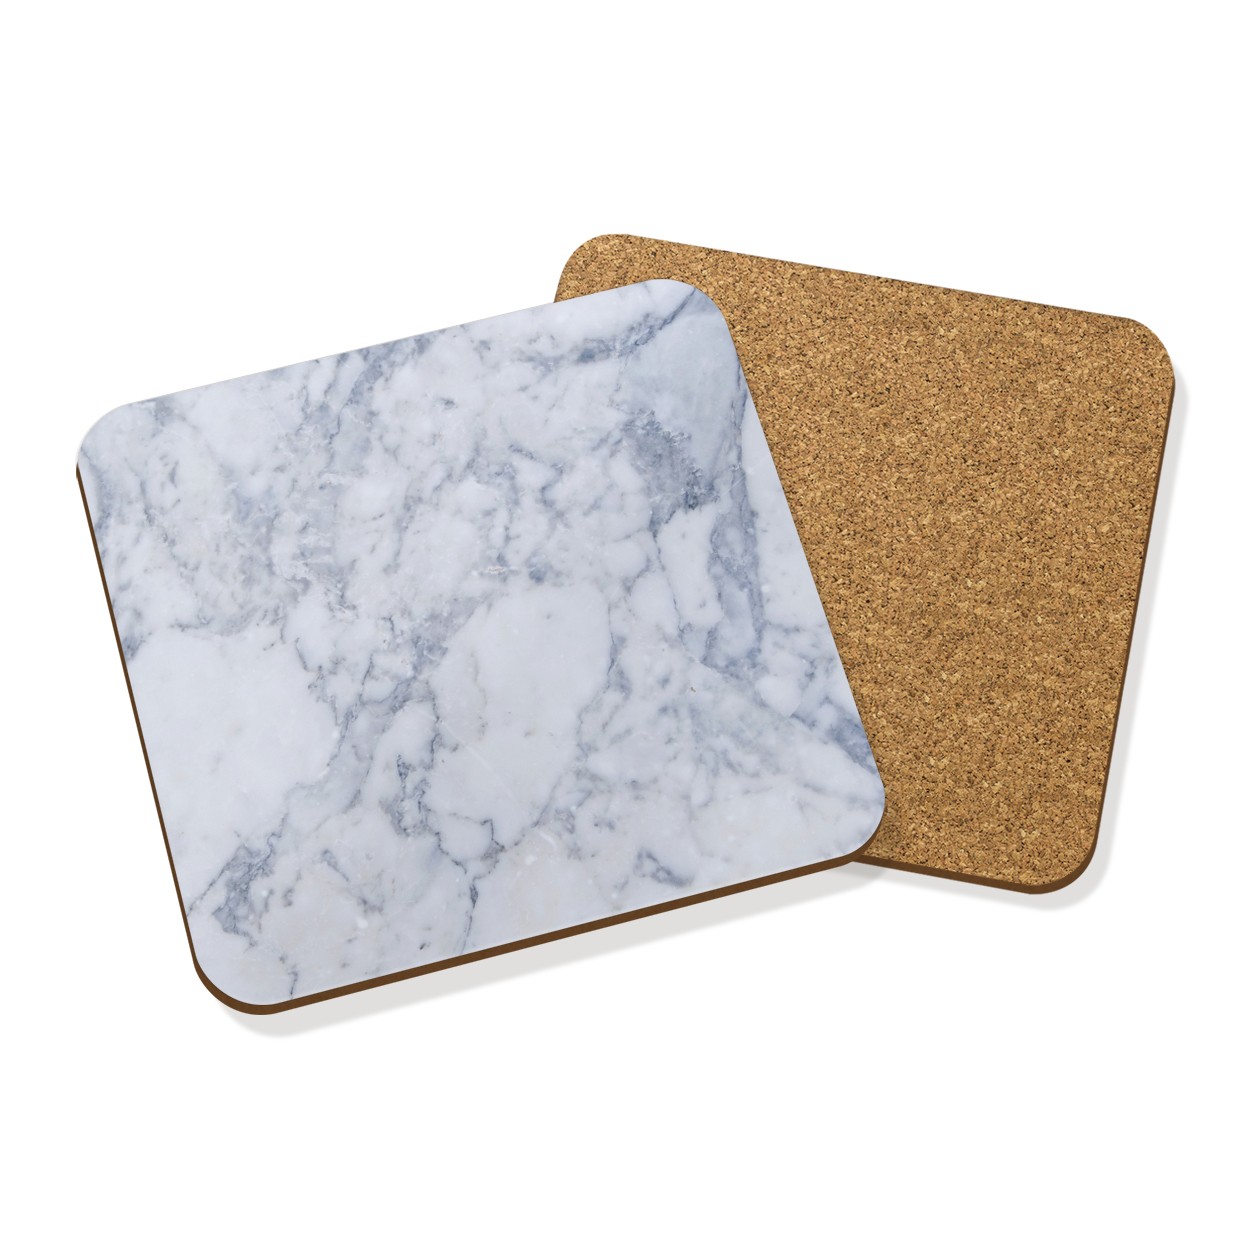 WHITE & GREY MARBLE EFFECT CLASSIC DRINKS COASTER MAT CORK SQUARE SET X4